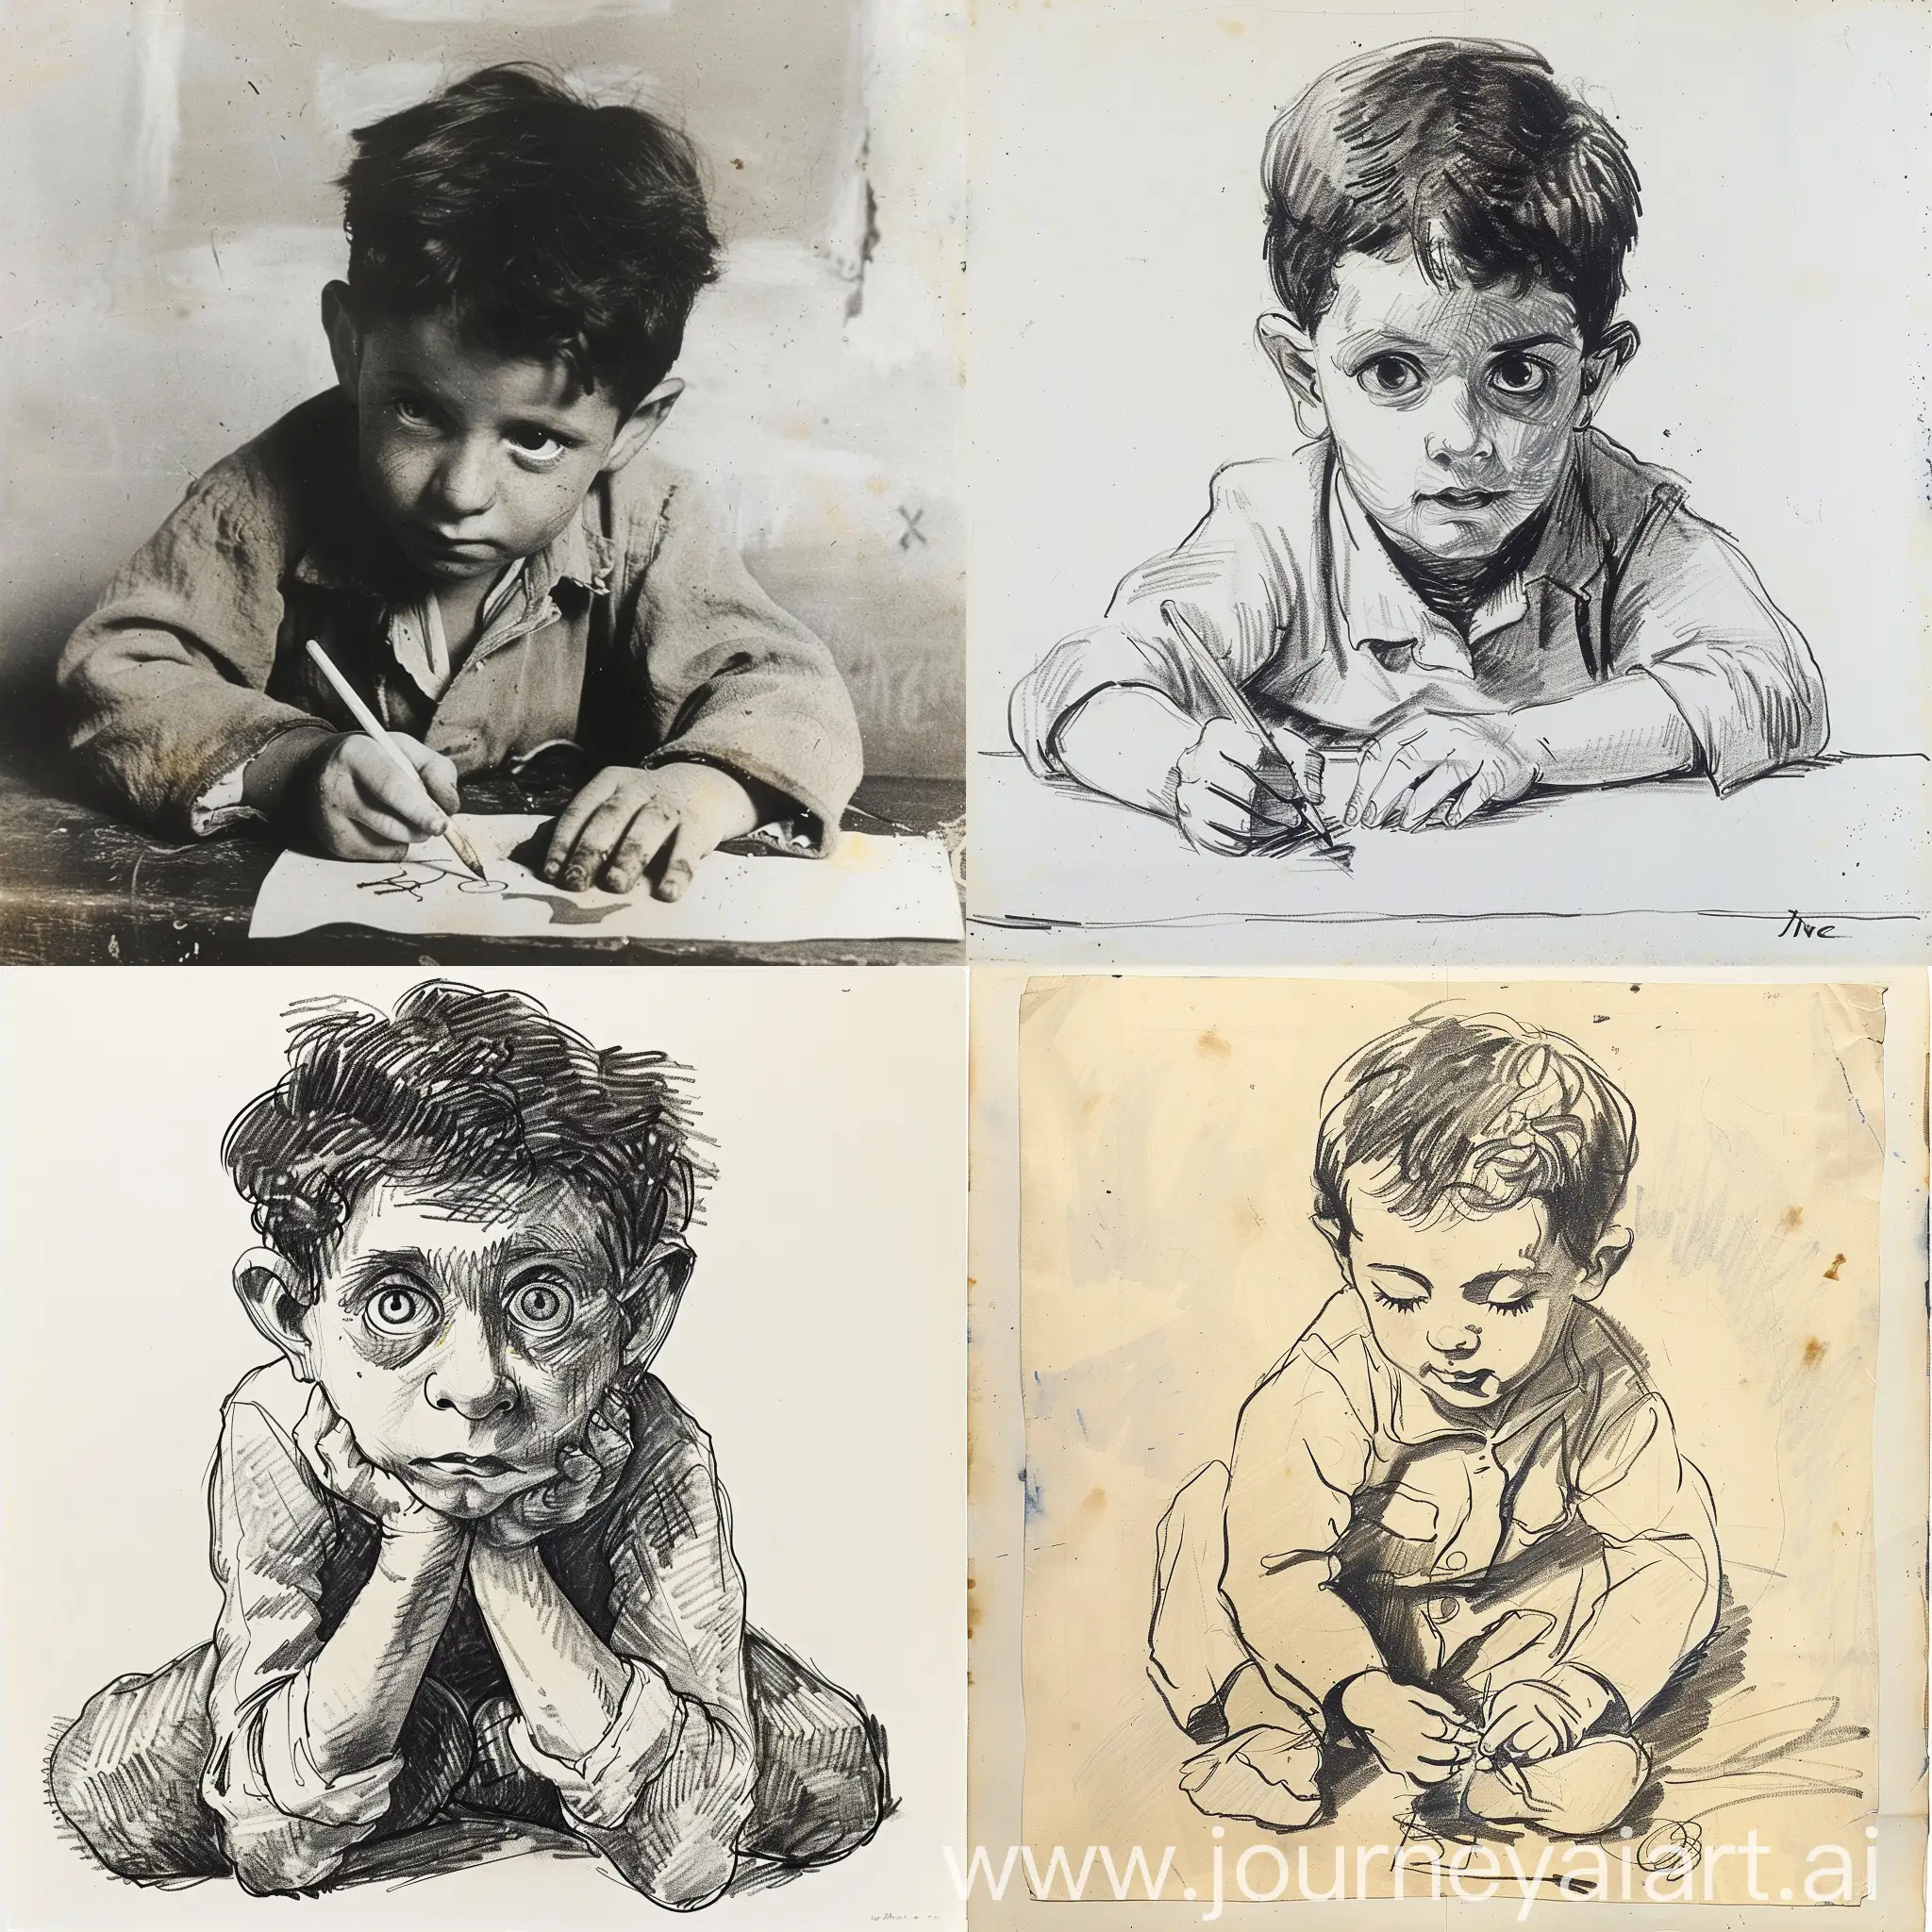 Pablo Picasso as a very small child drawing